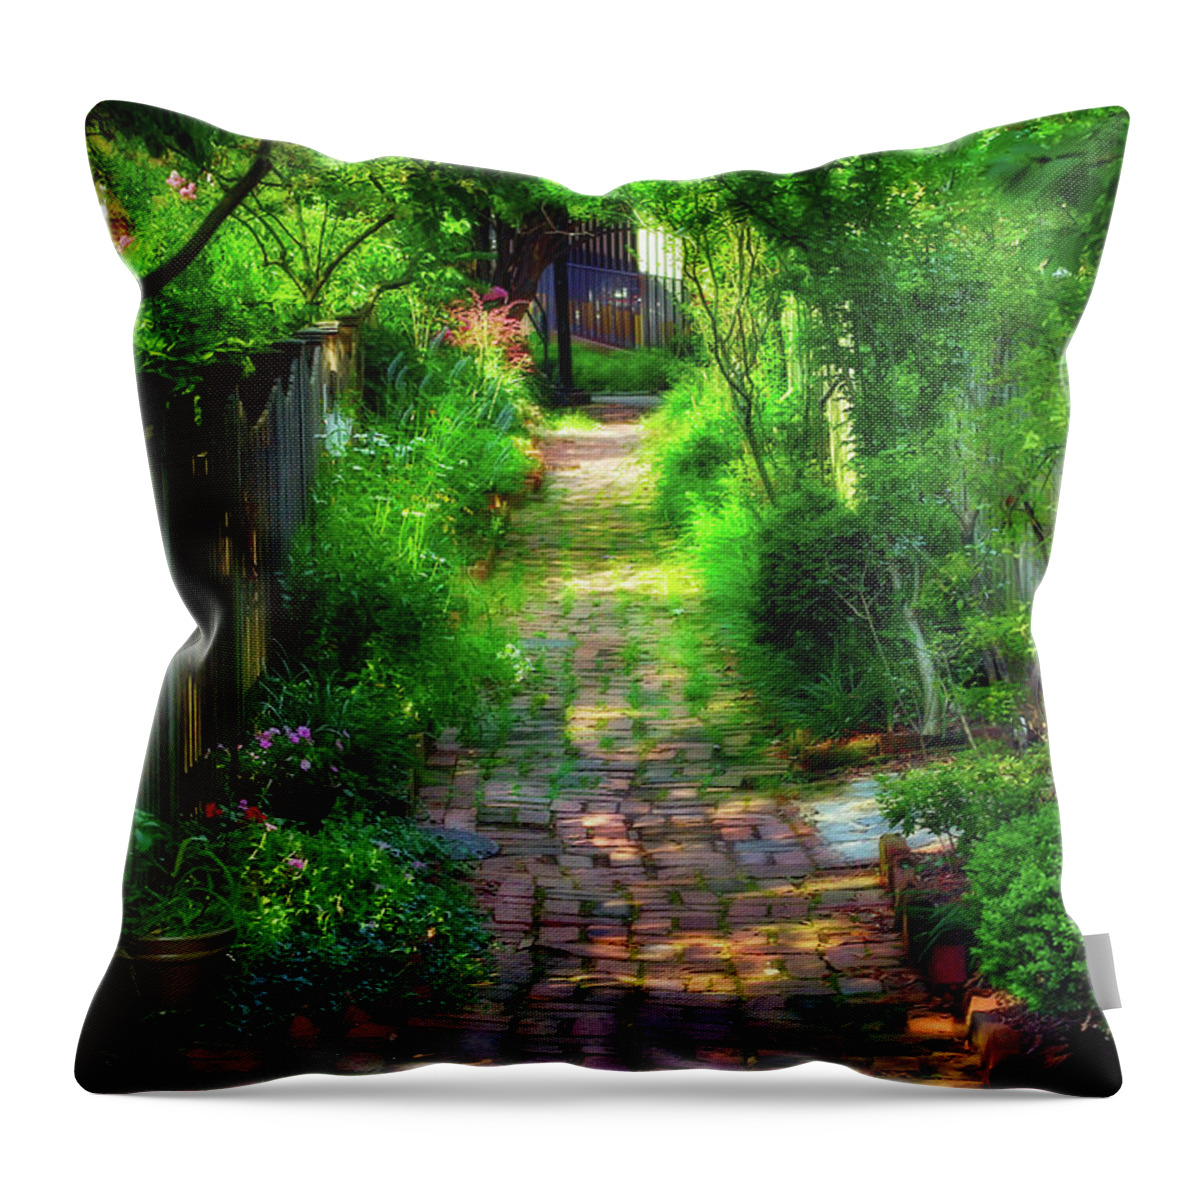 2d Throw Pillow featuring the photograph Garden Alley by Brian Wallace